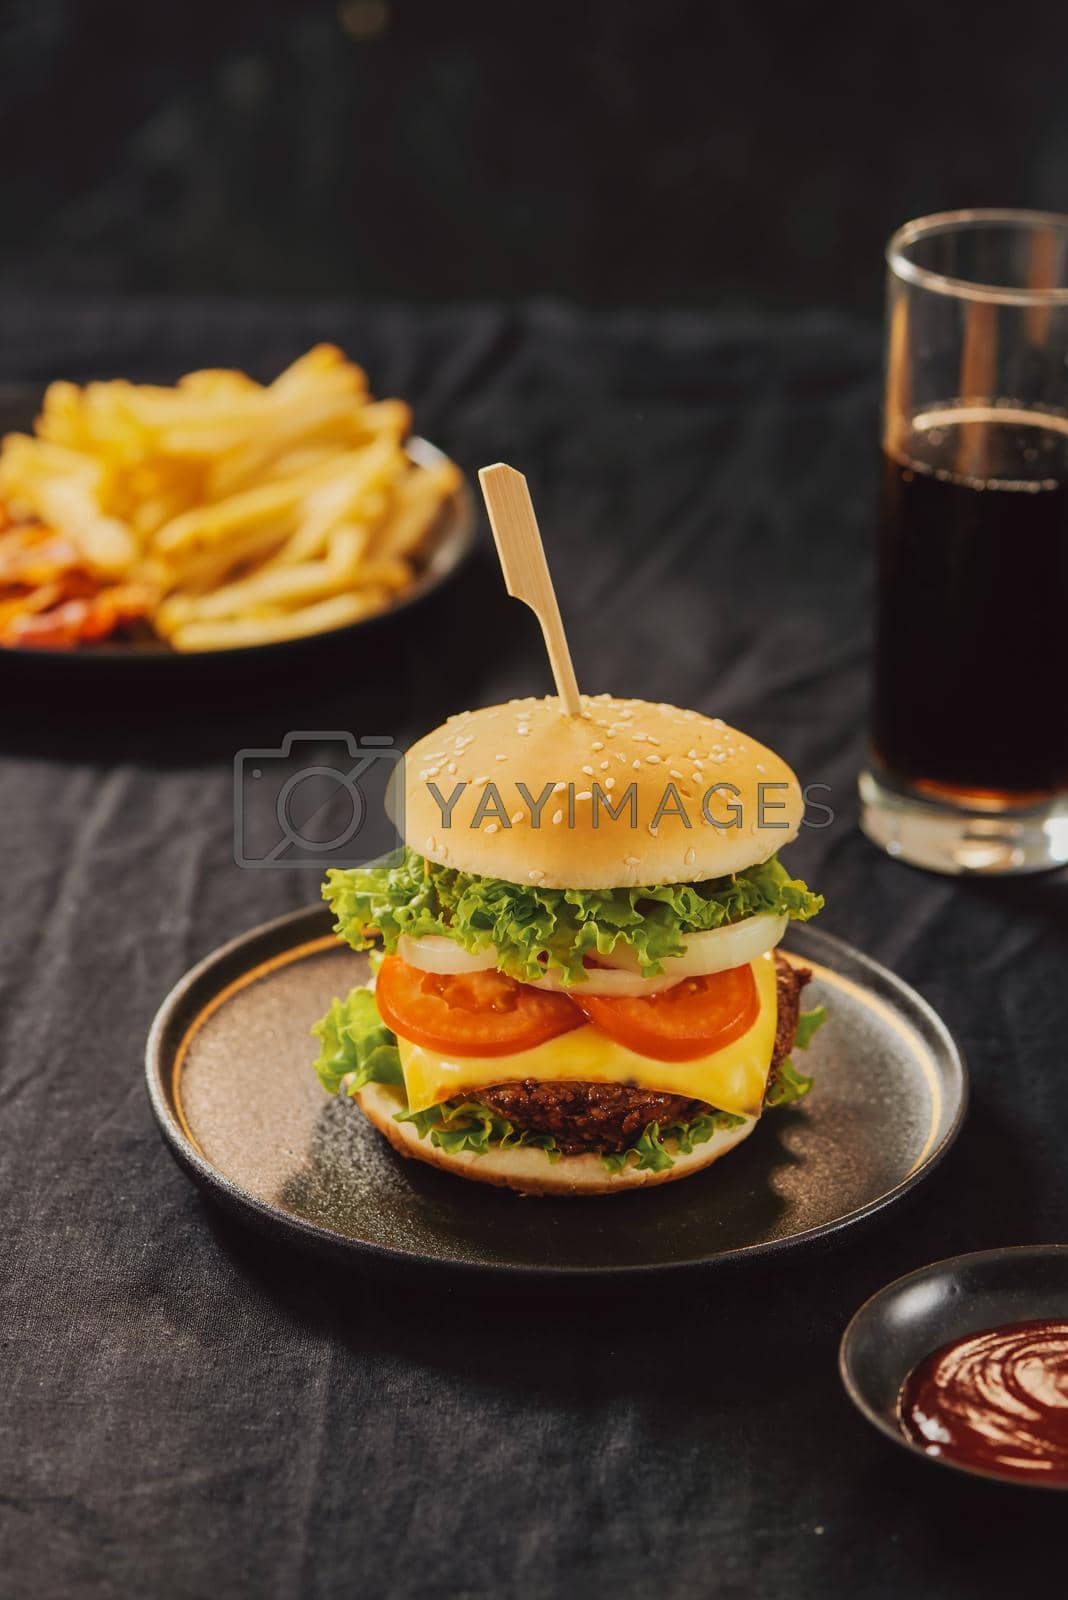 Royalty free image of Unhealthy concept. unhealthy food: Burger, sauce, potatoes, cola.  by makidotvn